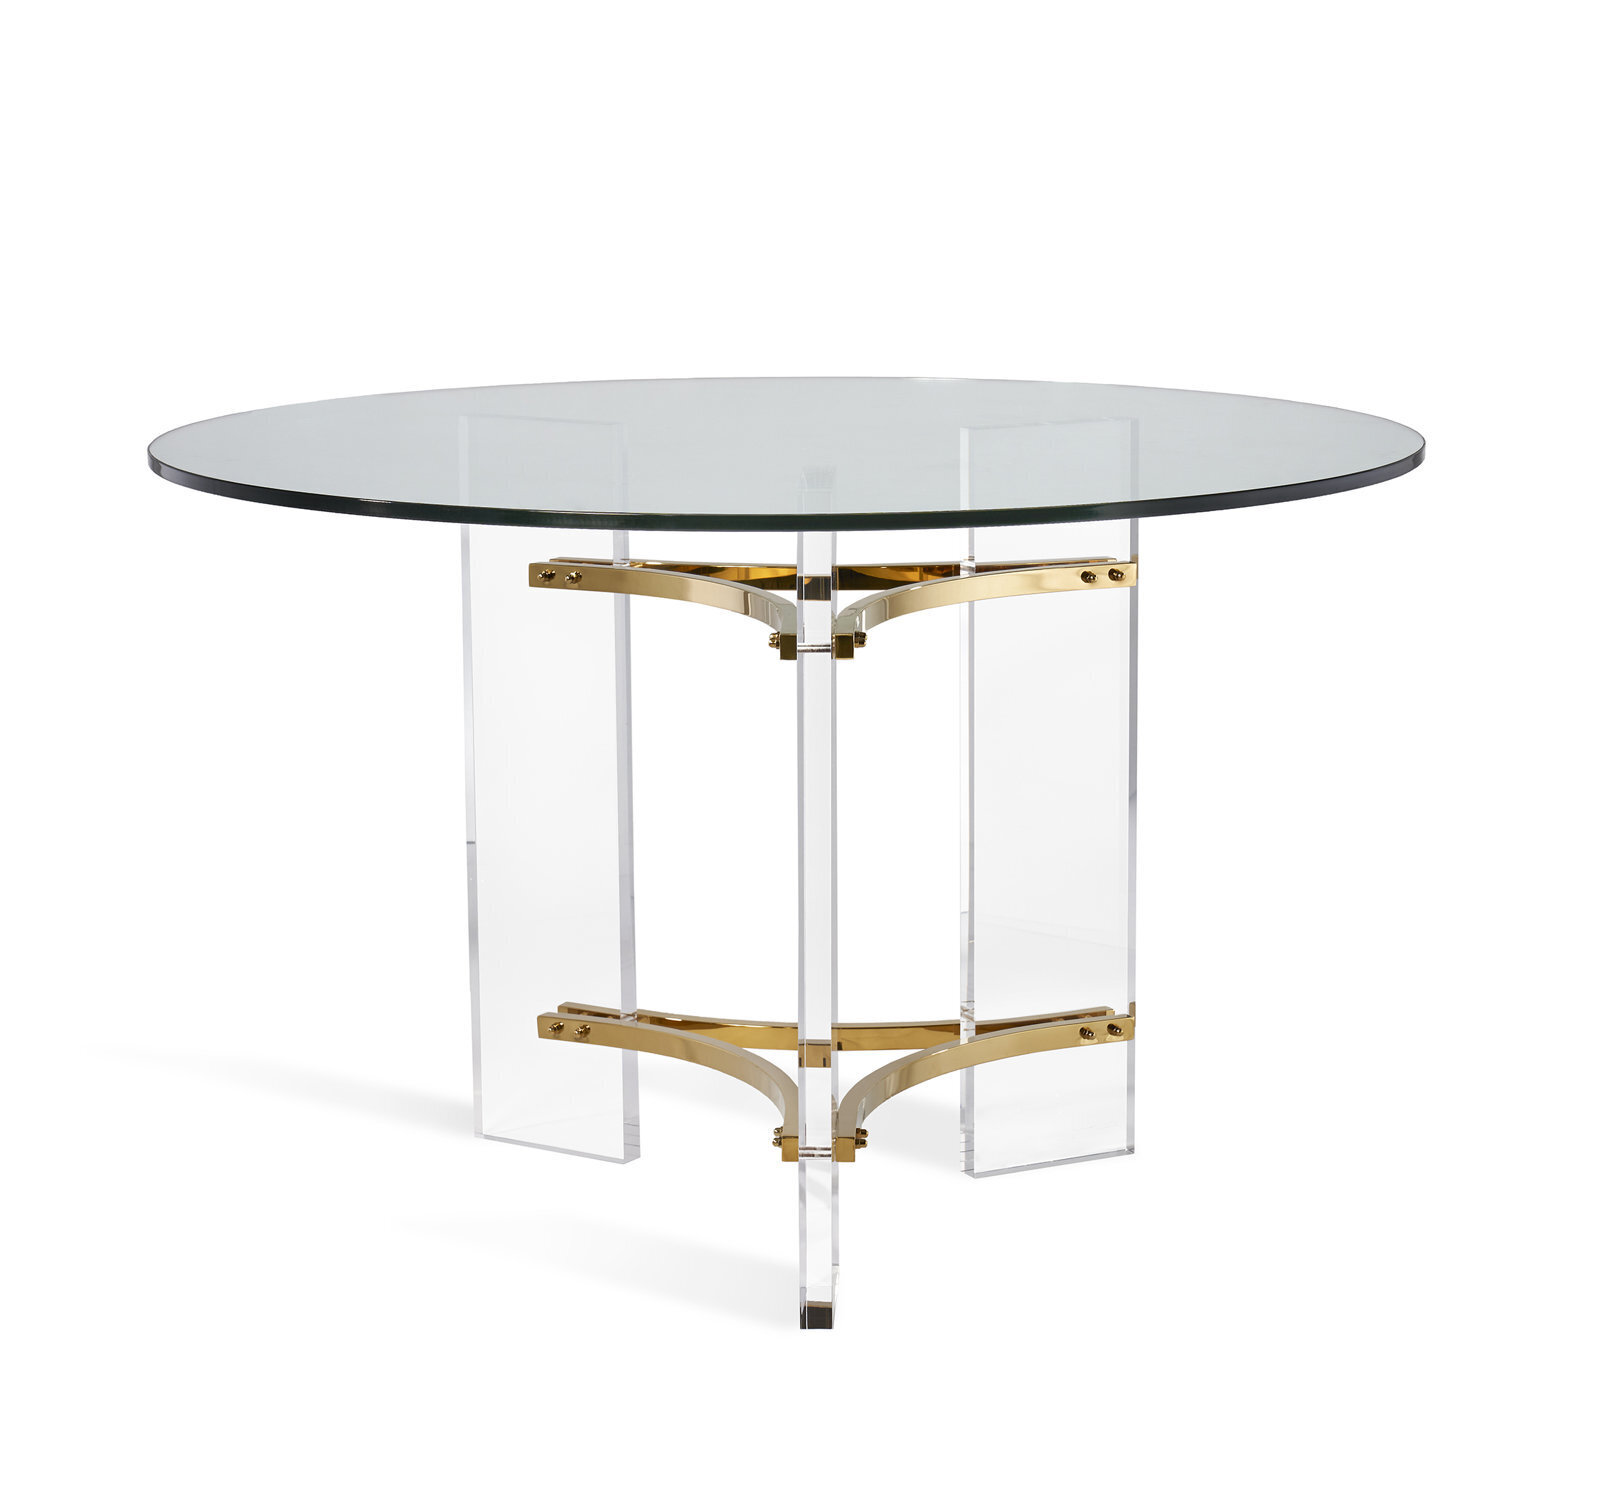 Sculptural Round Glass Dining Table for Six